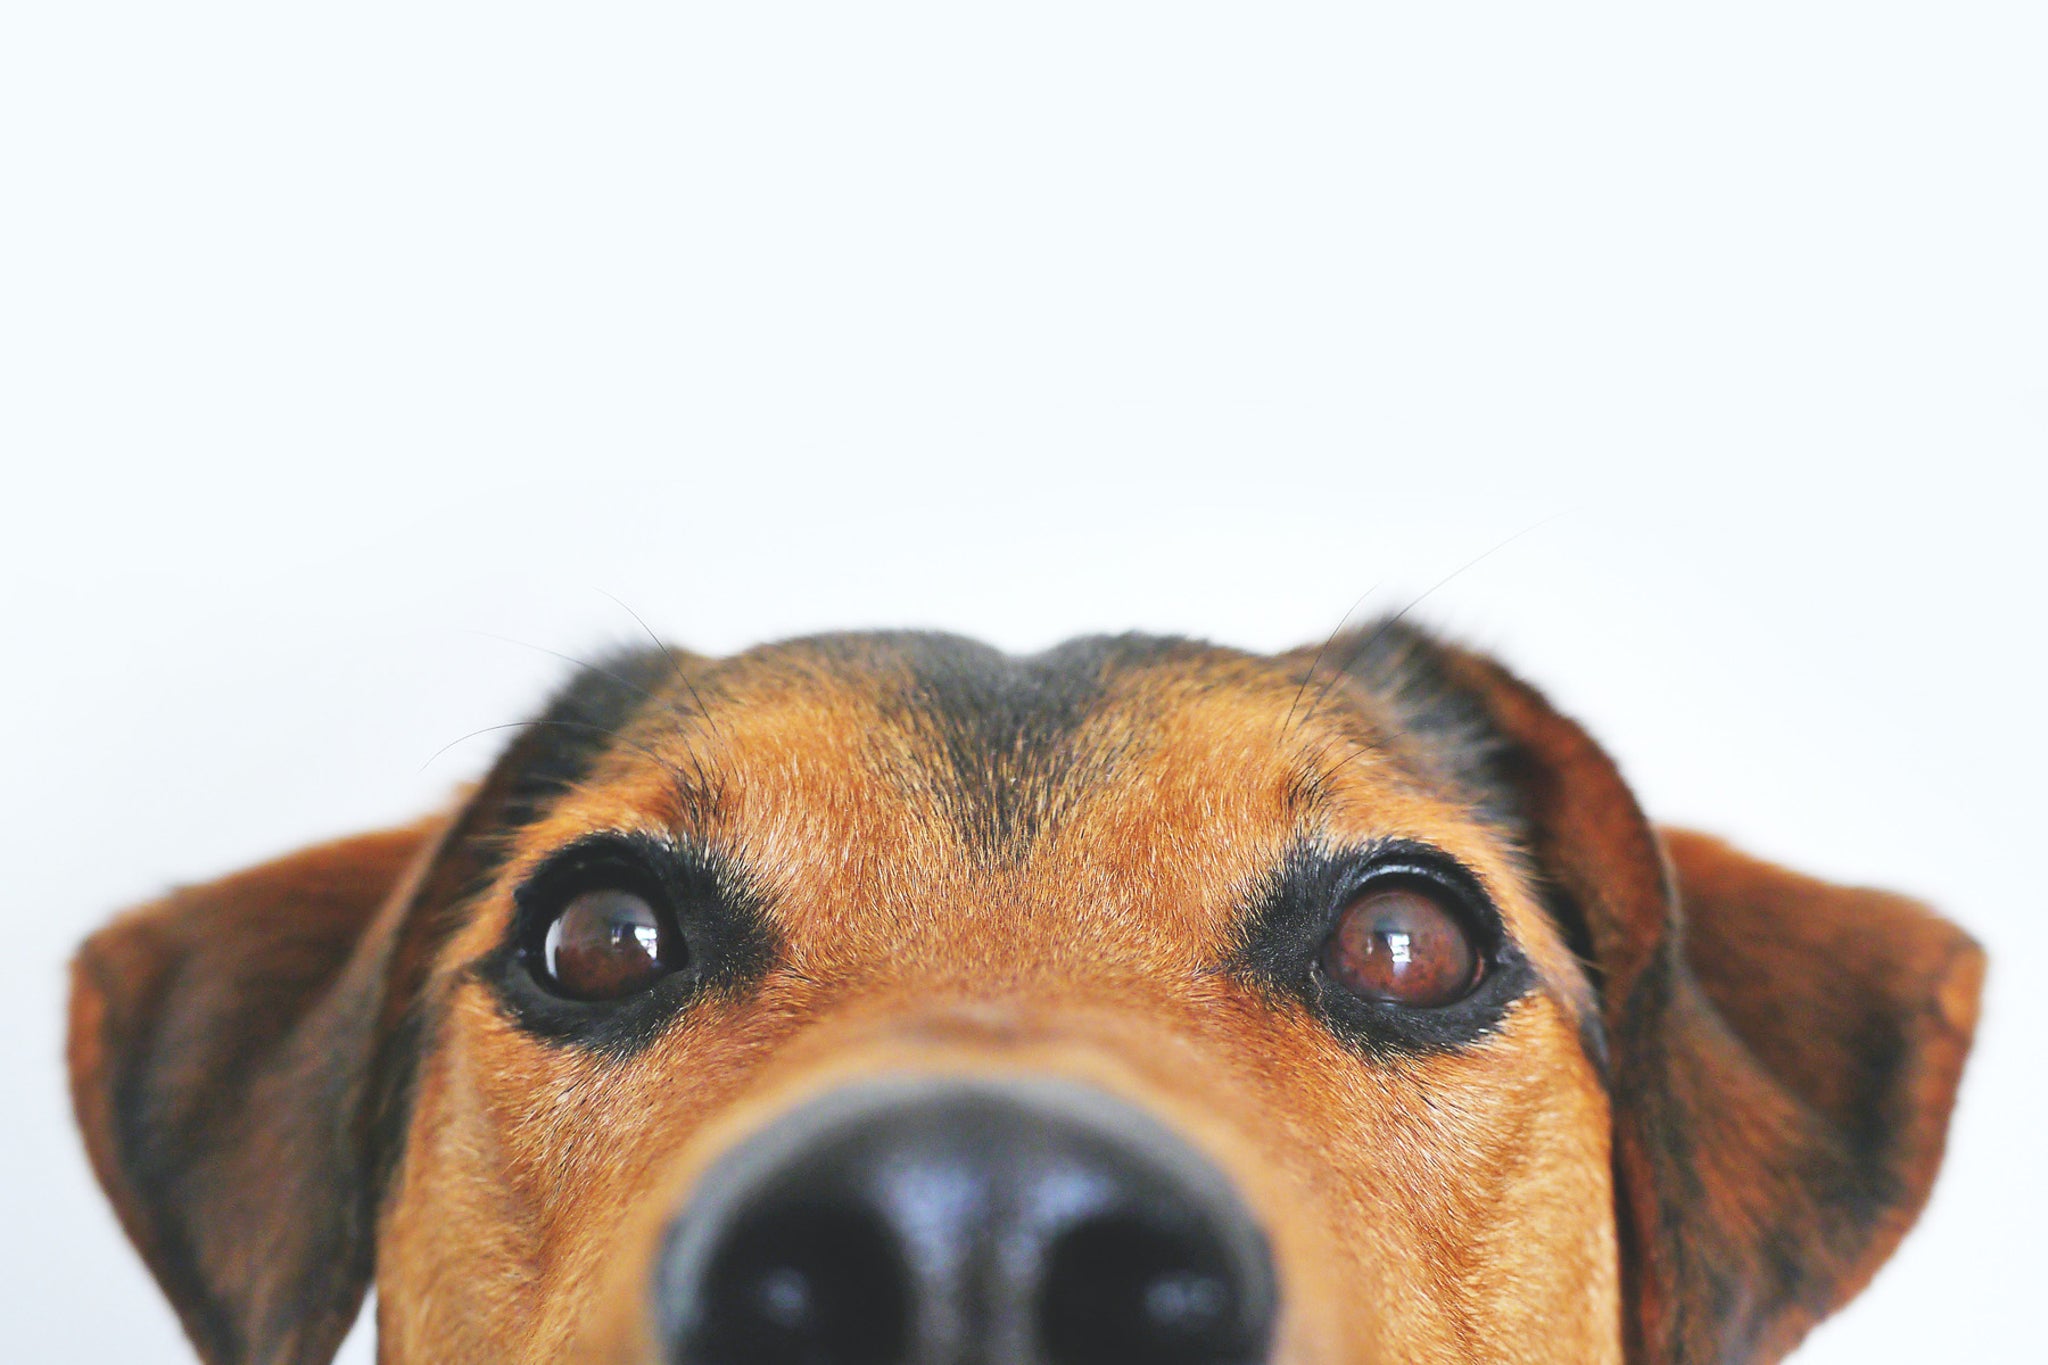 037_close_up_of_brown_and_black_dog_s_face_against_a_white_background.jpg